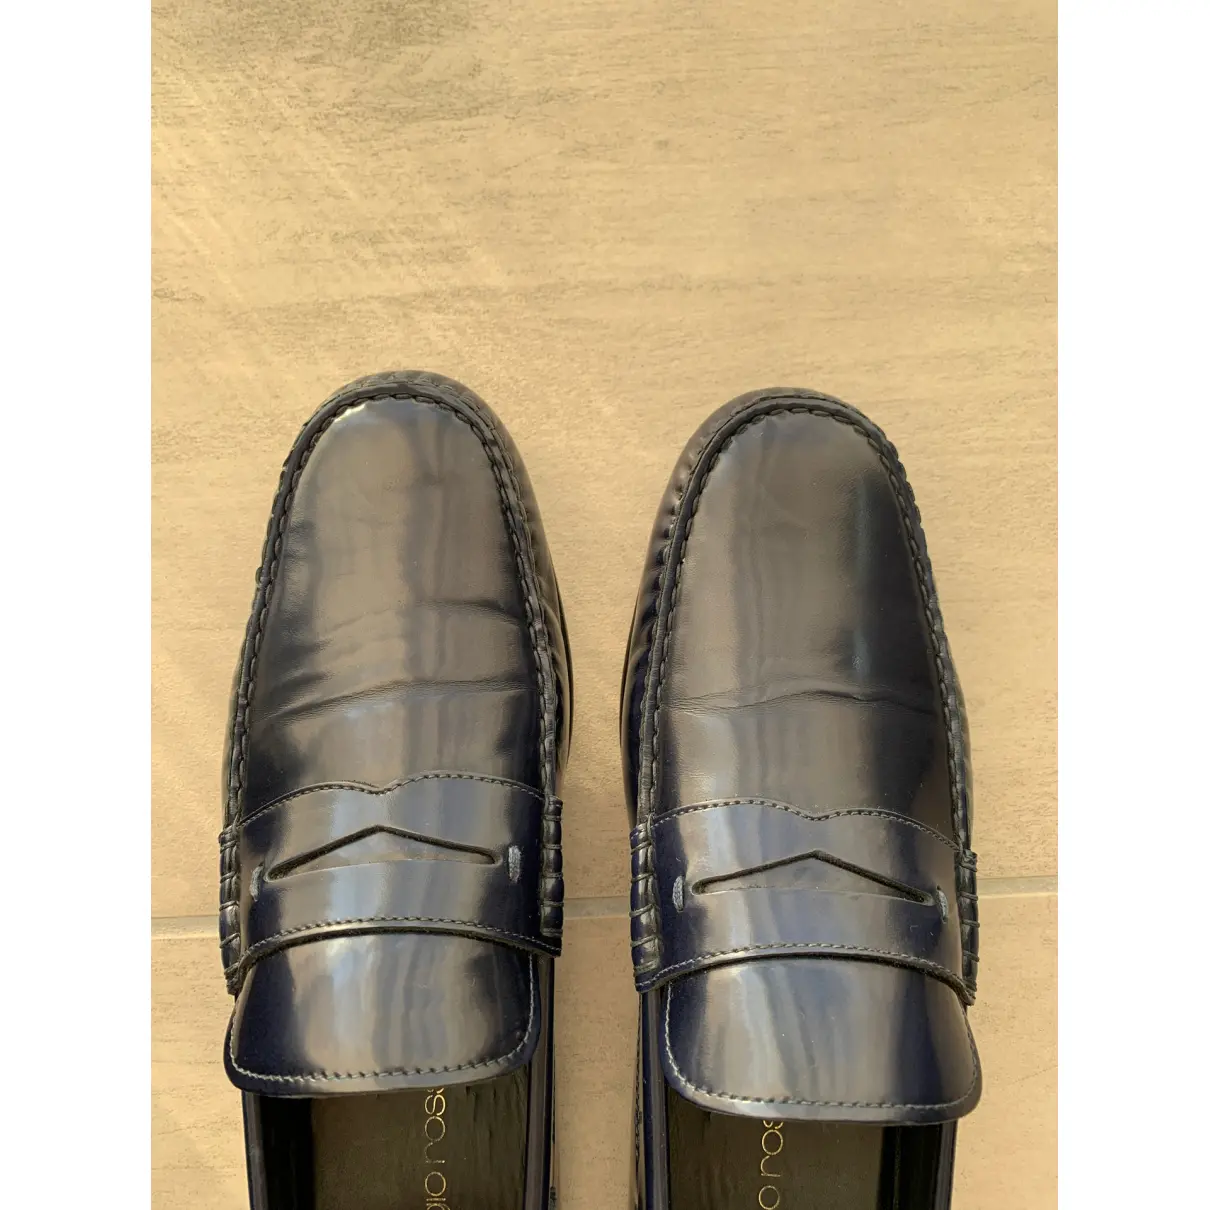 Buy Sergio Rossi Leather flats online